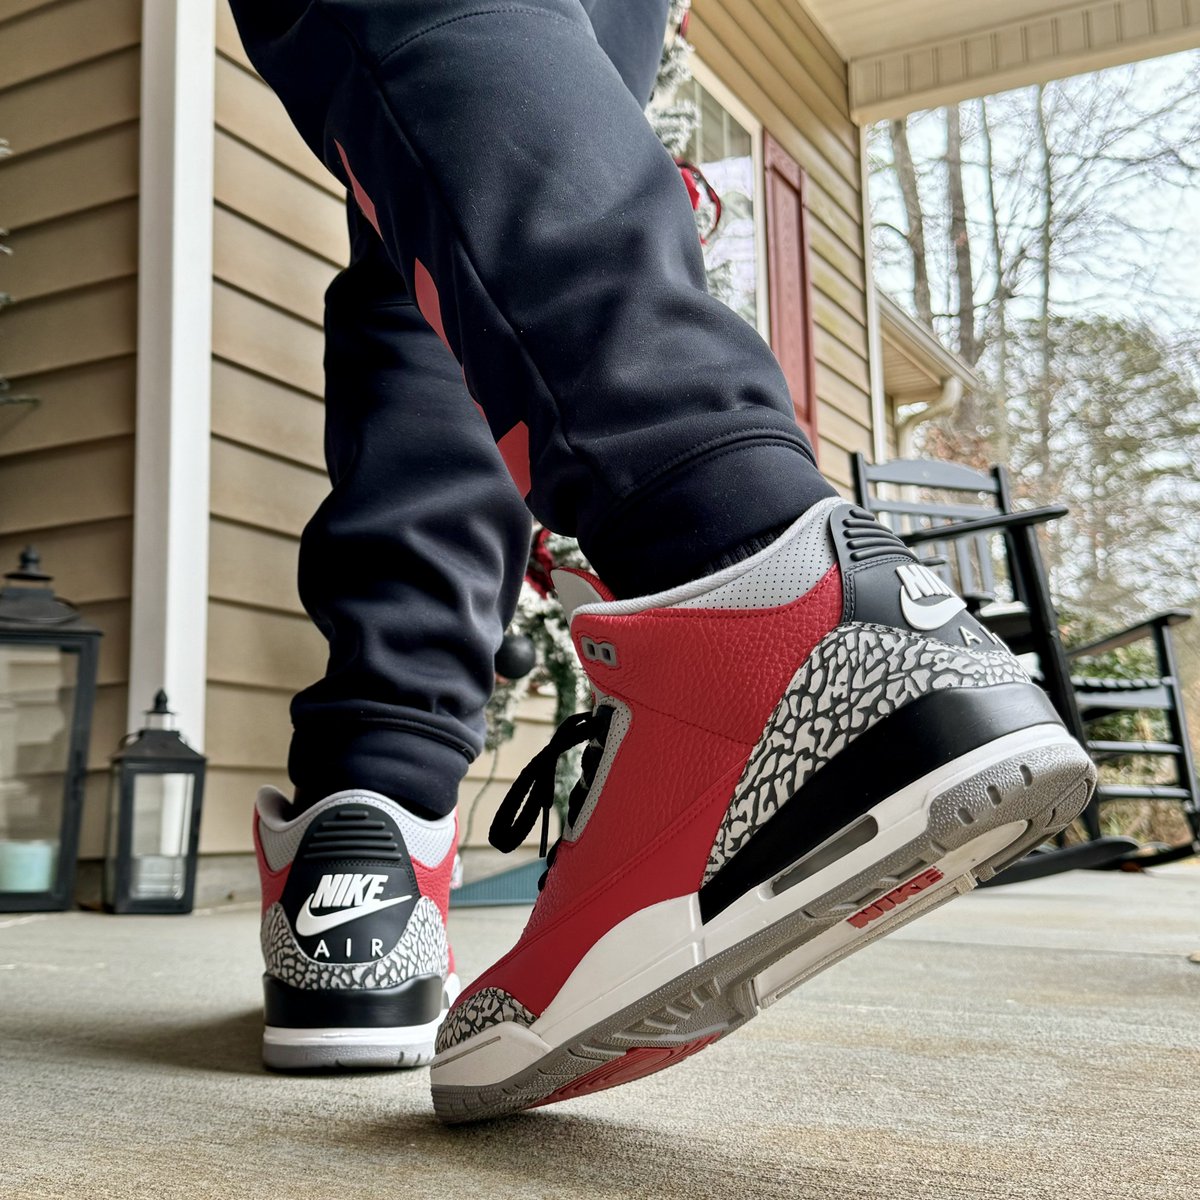 Pulled out the Red Cement 3’s #KOTD

Also my first attempt at the #JMillzChallenge how’d I do? 😬